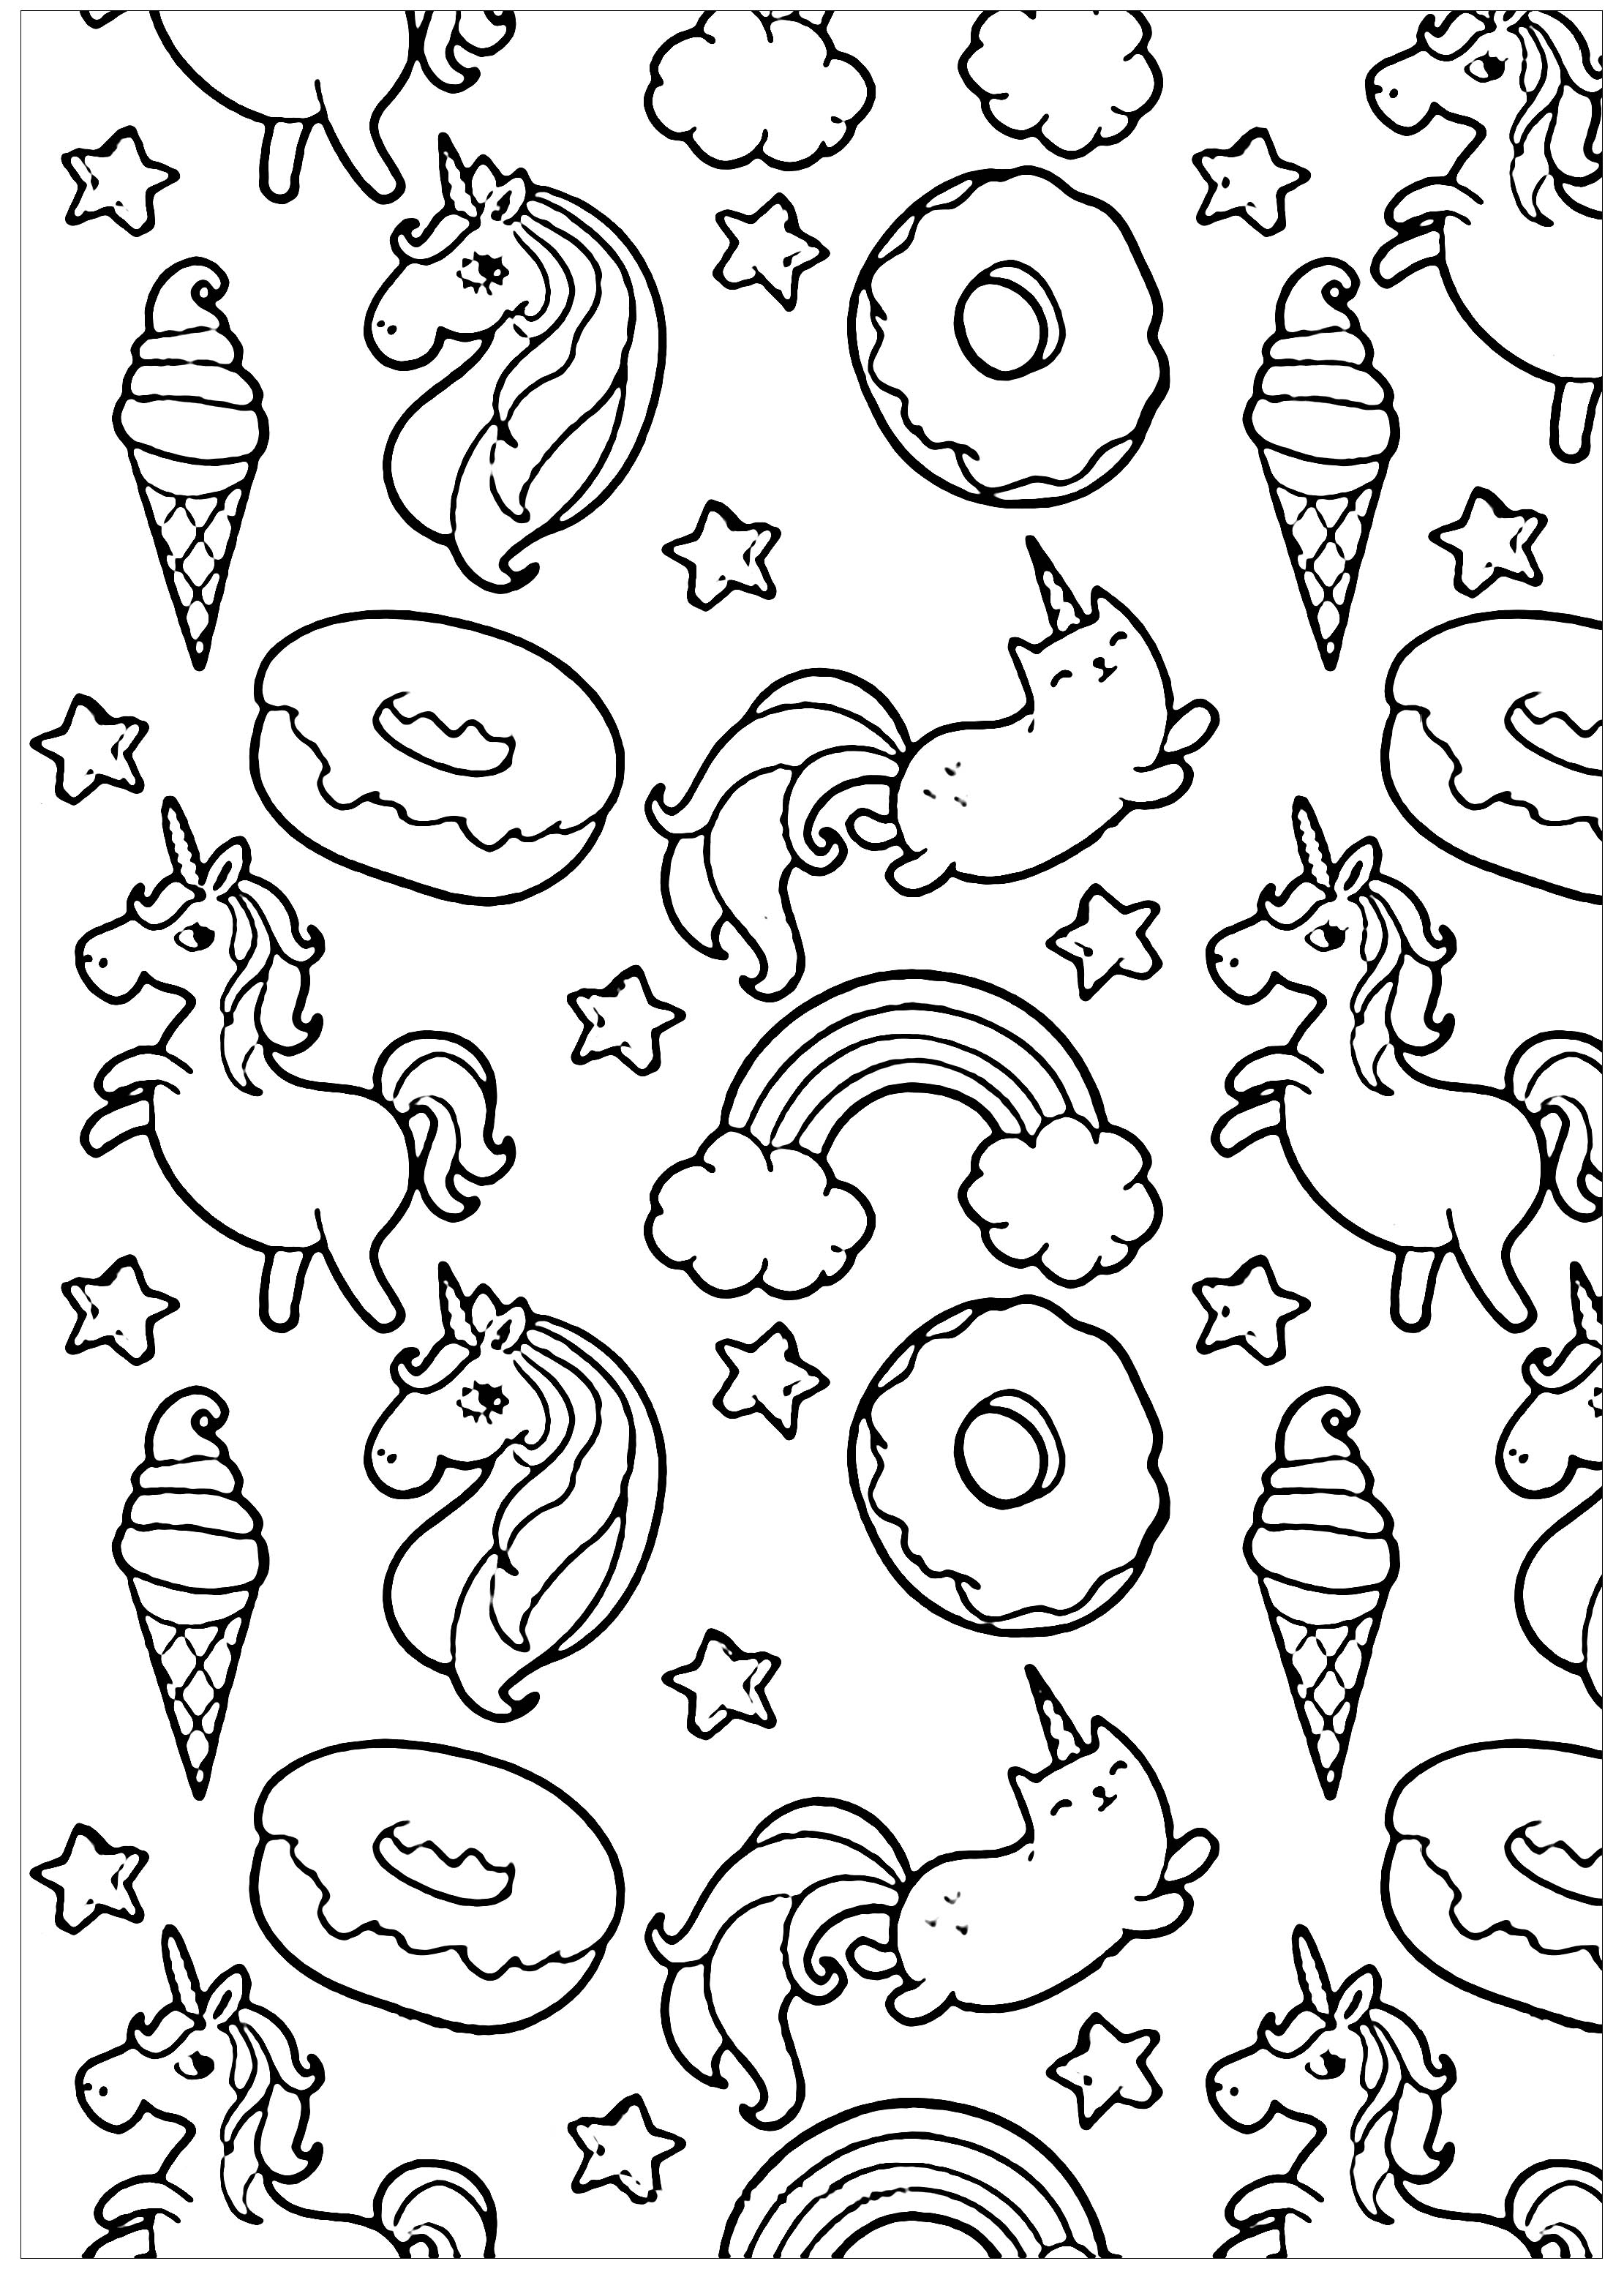 Download Kawaii Coloring Pages For Adults